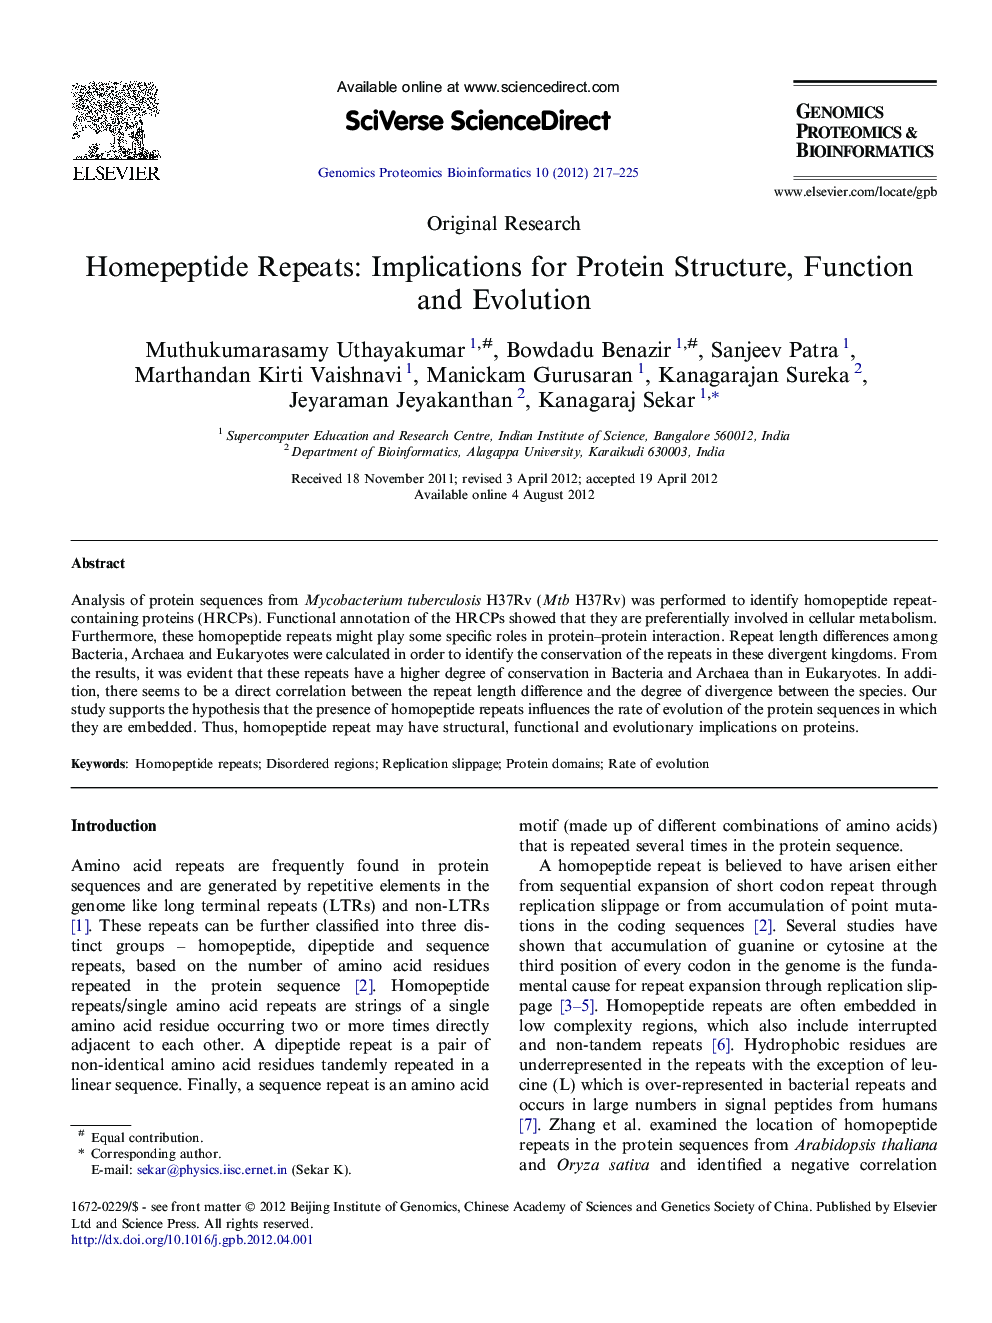 Homepeptide Repeats: Implications for Protein Structure, Function and Evolution